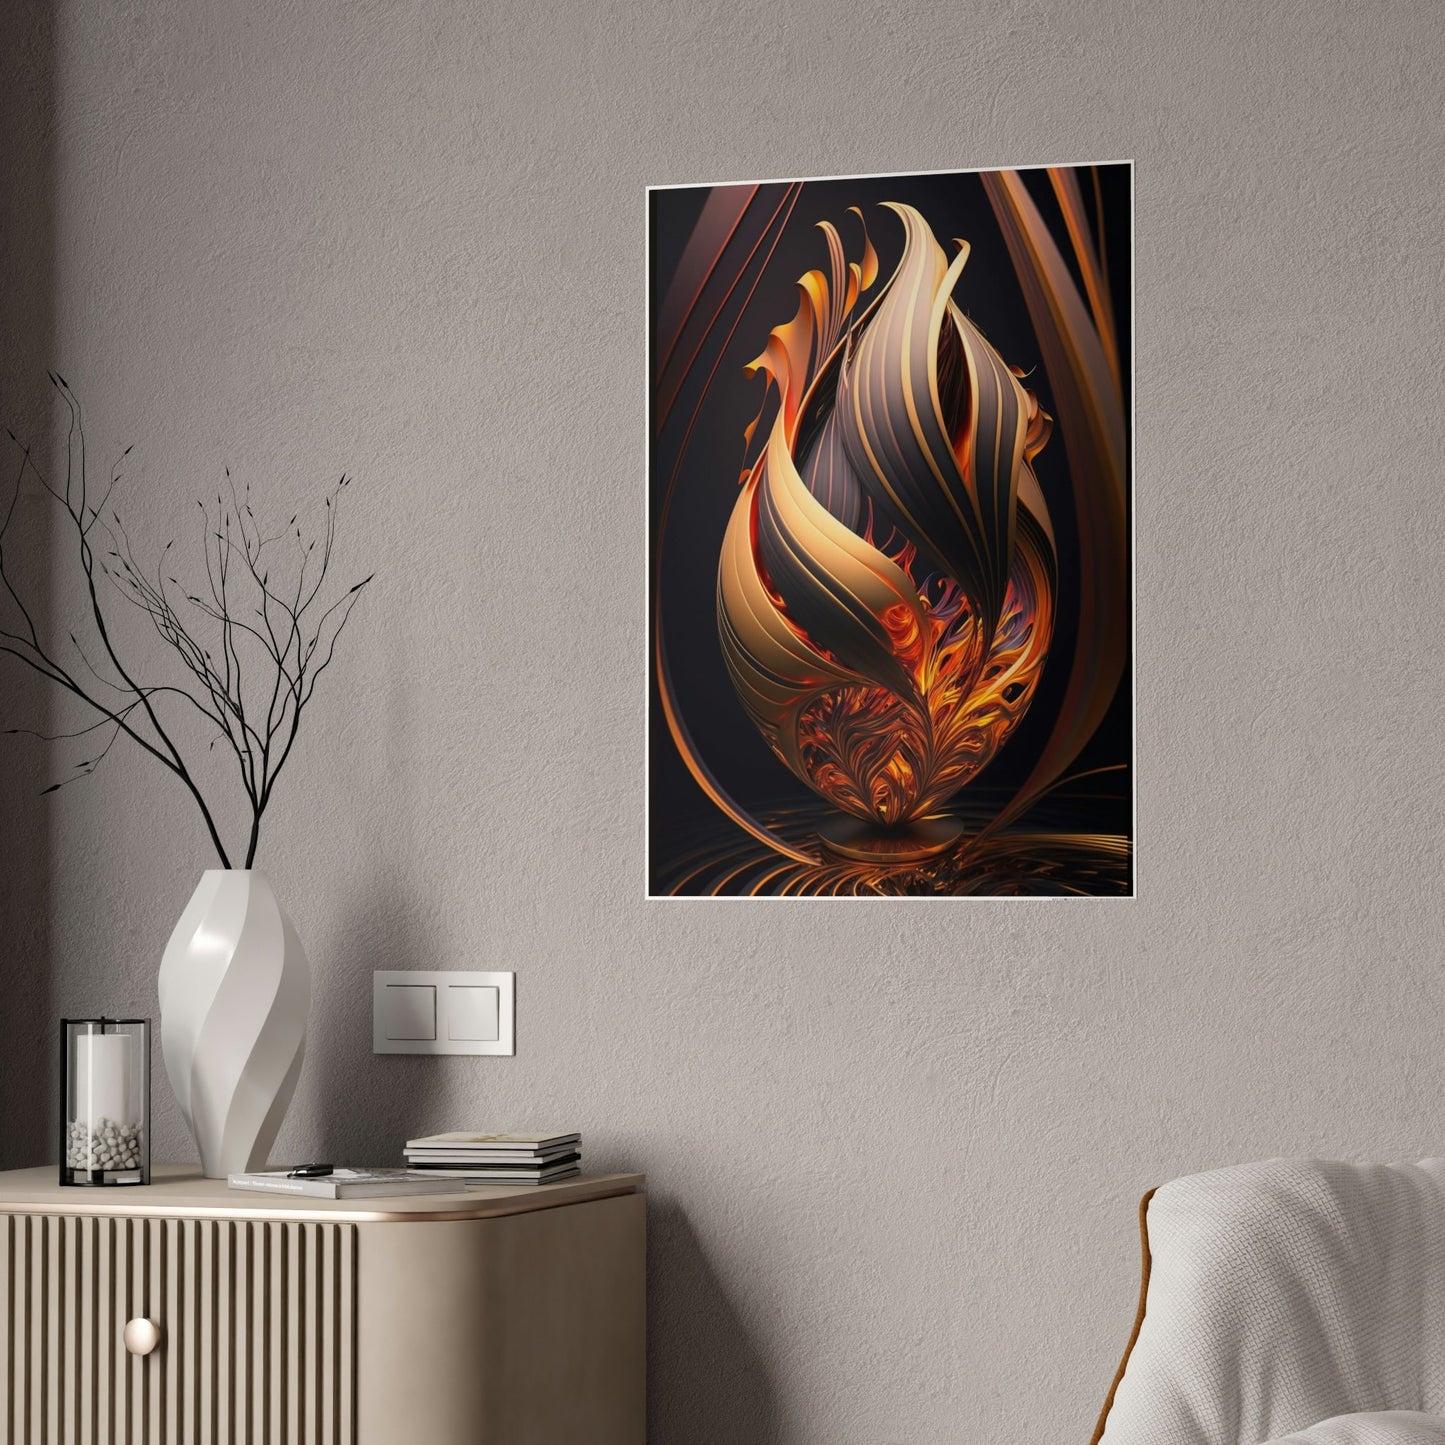 Sleek and Chic: A Wall Art Piece of Contemporary Design